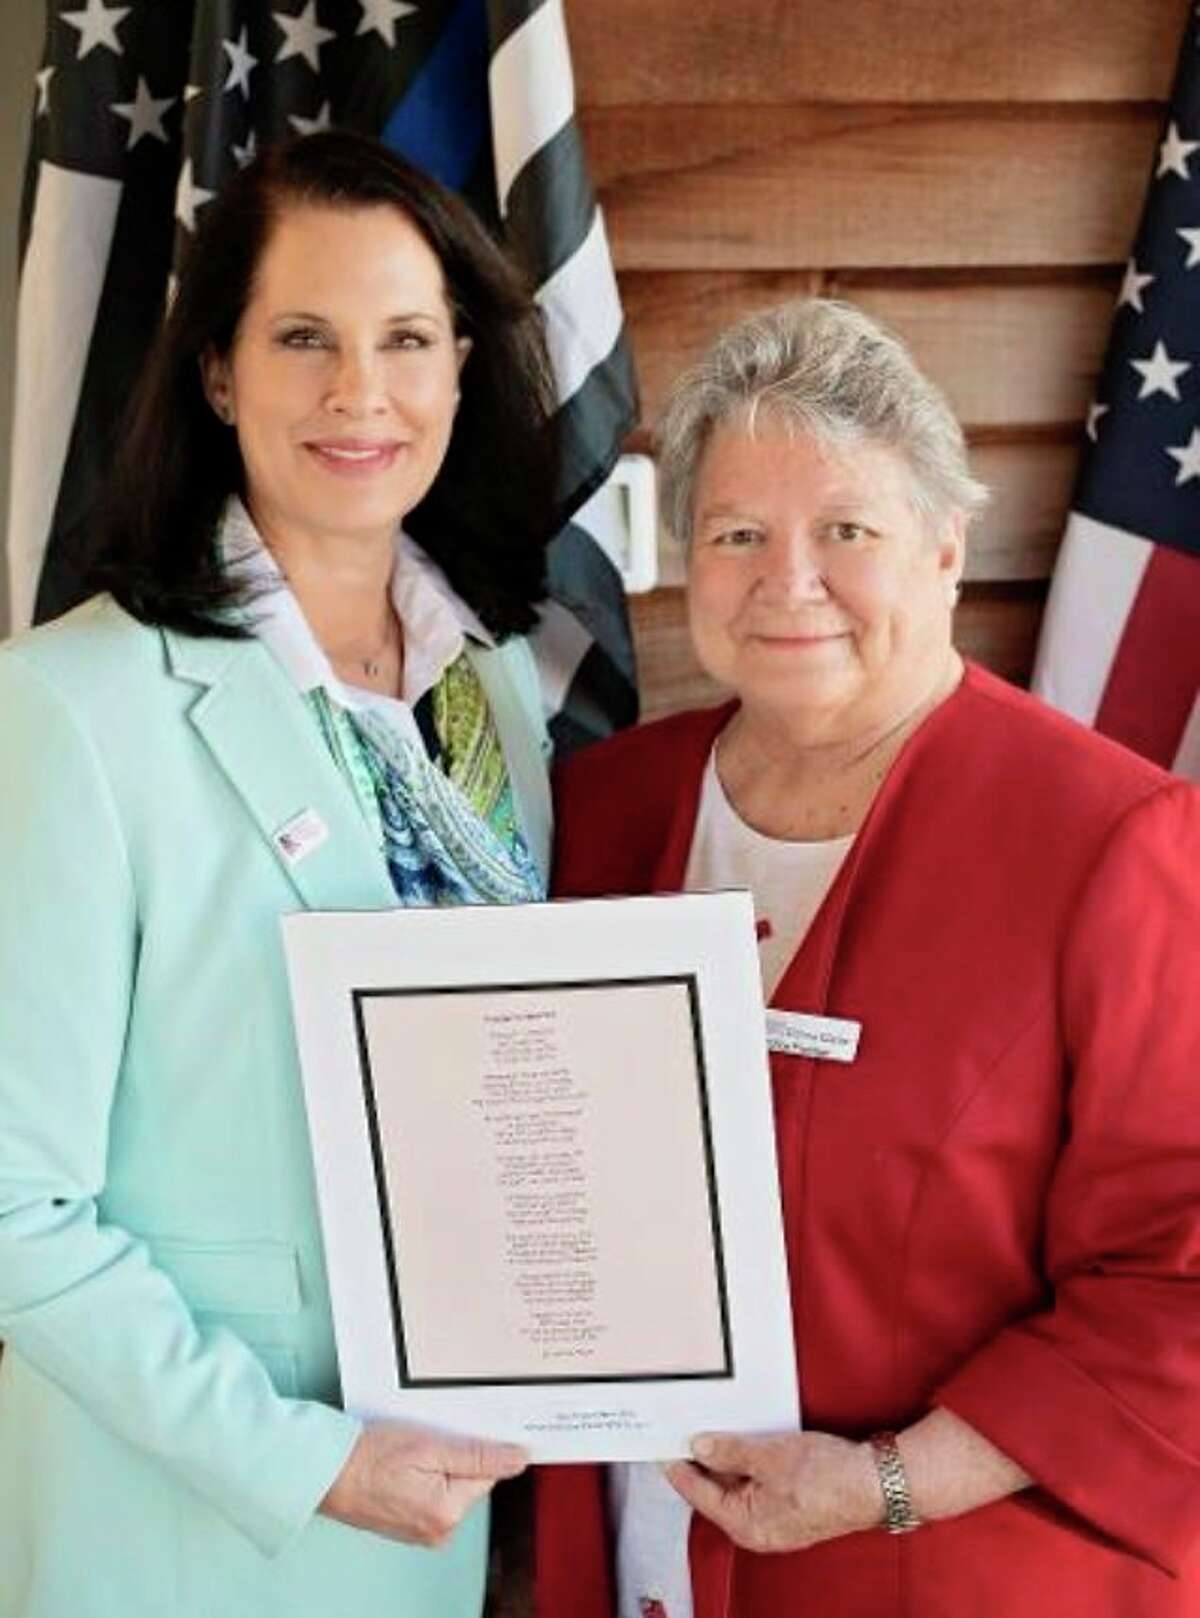 Jane Freeland-Gerschick (left) is awarded the Republican Women of Benzie County Woman of the Year Award by Donna Clarke (right), president of the club. (Courtesy Photo/Sondra Eddinger Halliday)